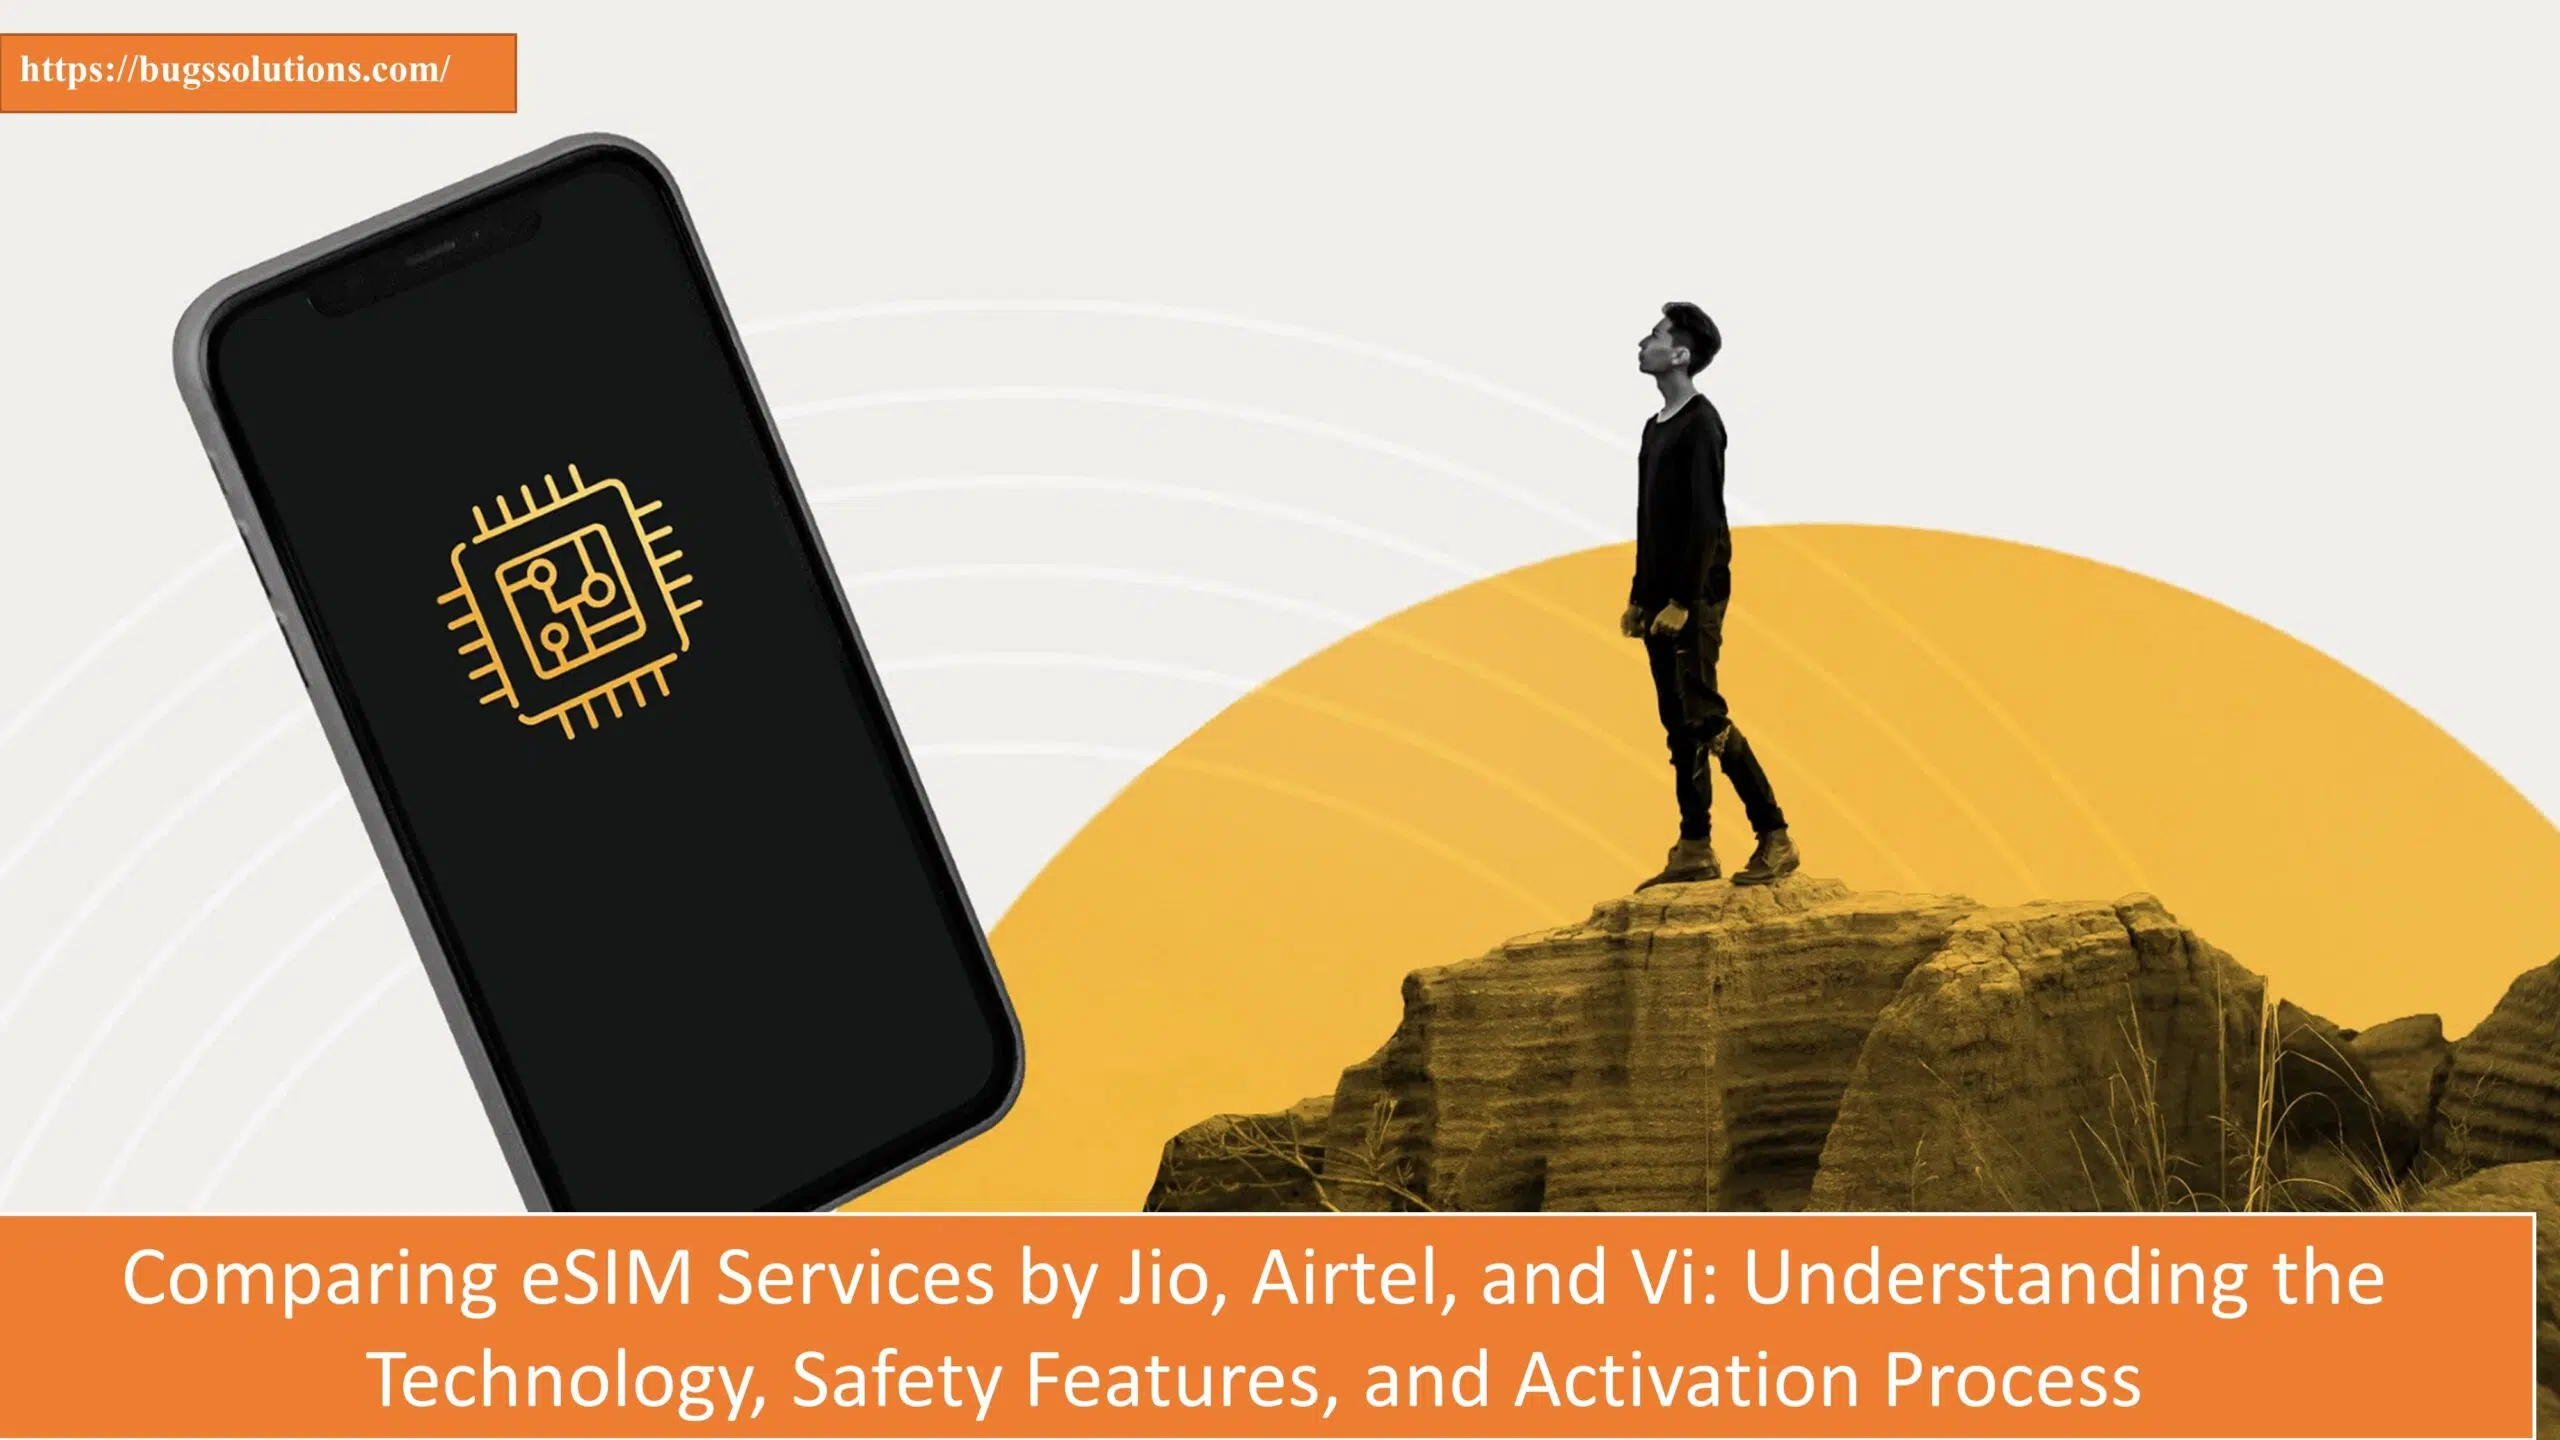 Comparing eSIM Services by Jio, Airtel, and Vi: Understanding the Technology, Safety Features, and Activation Process